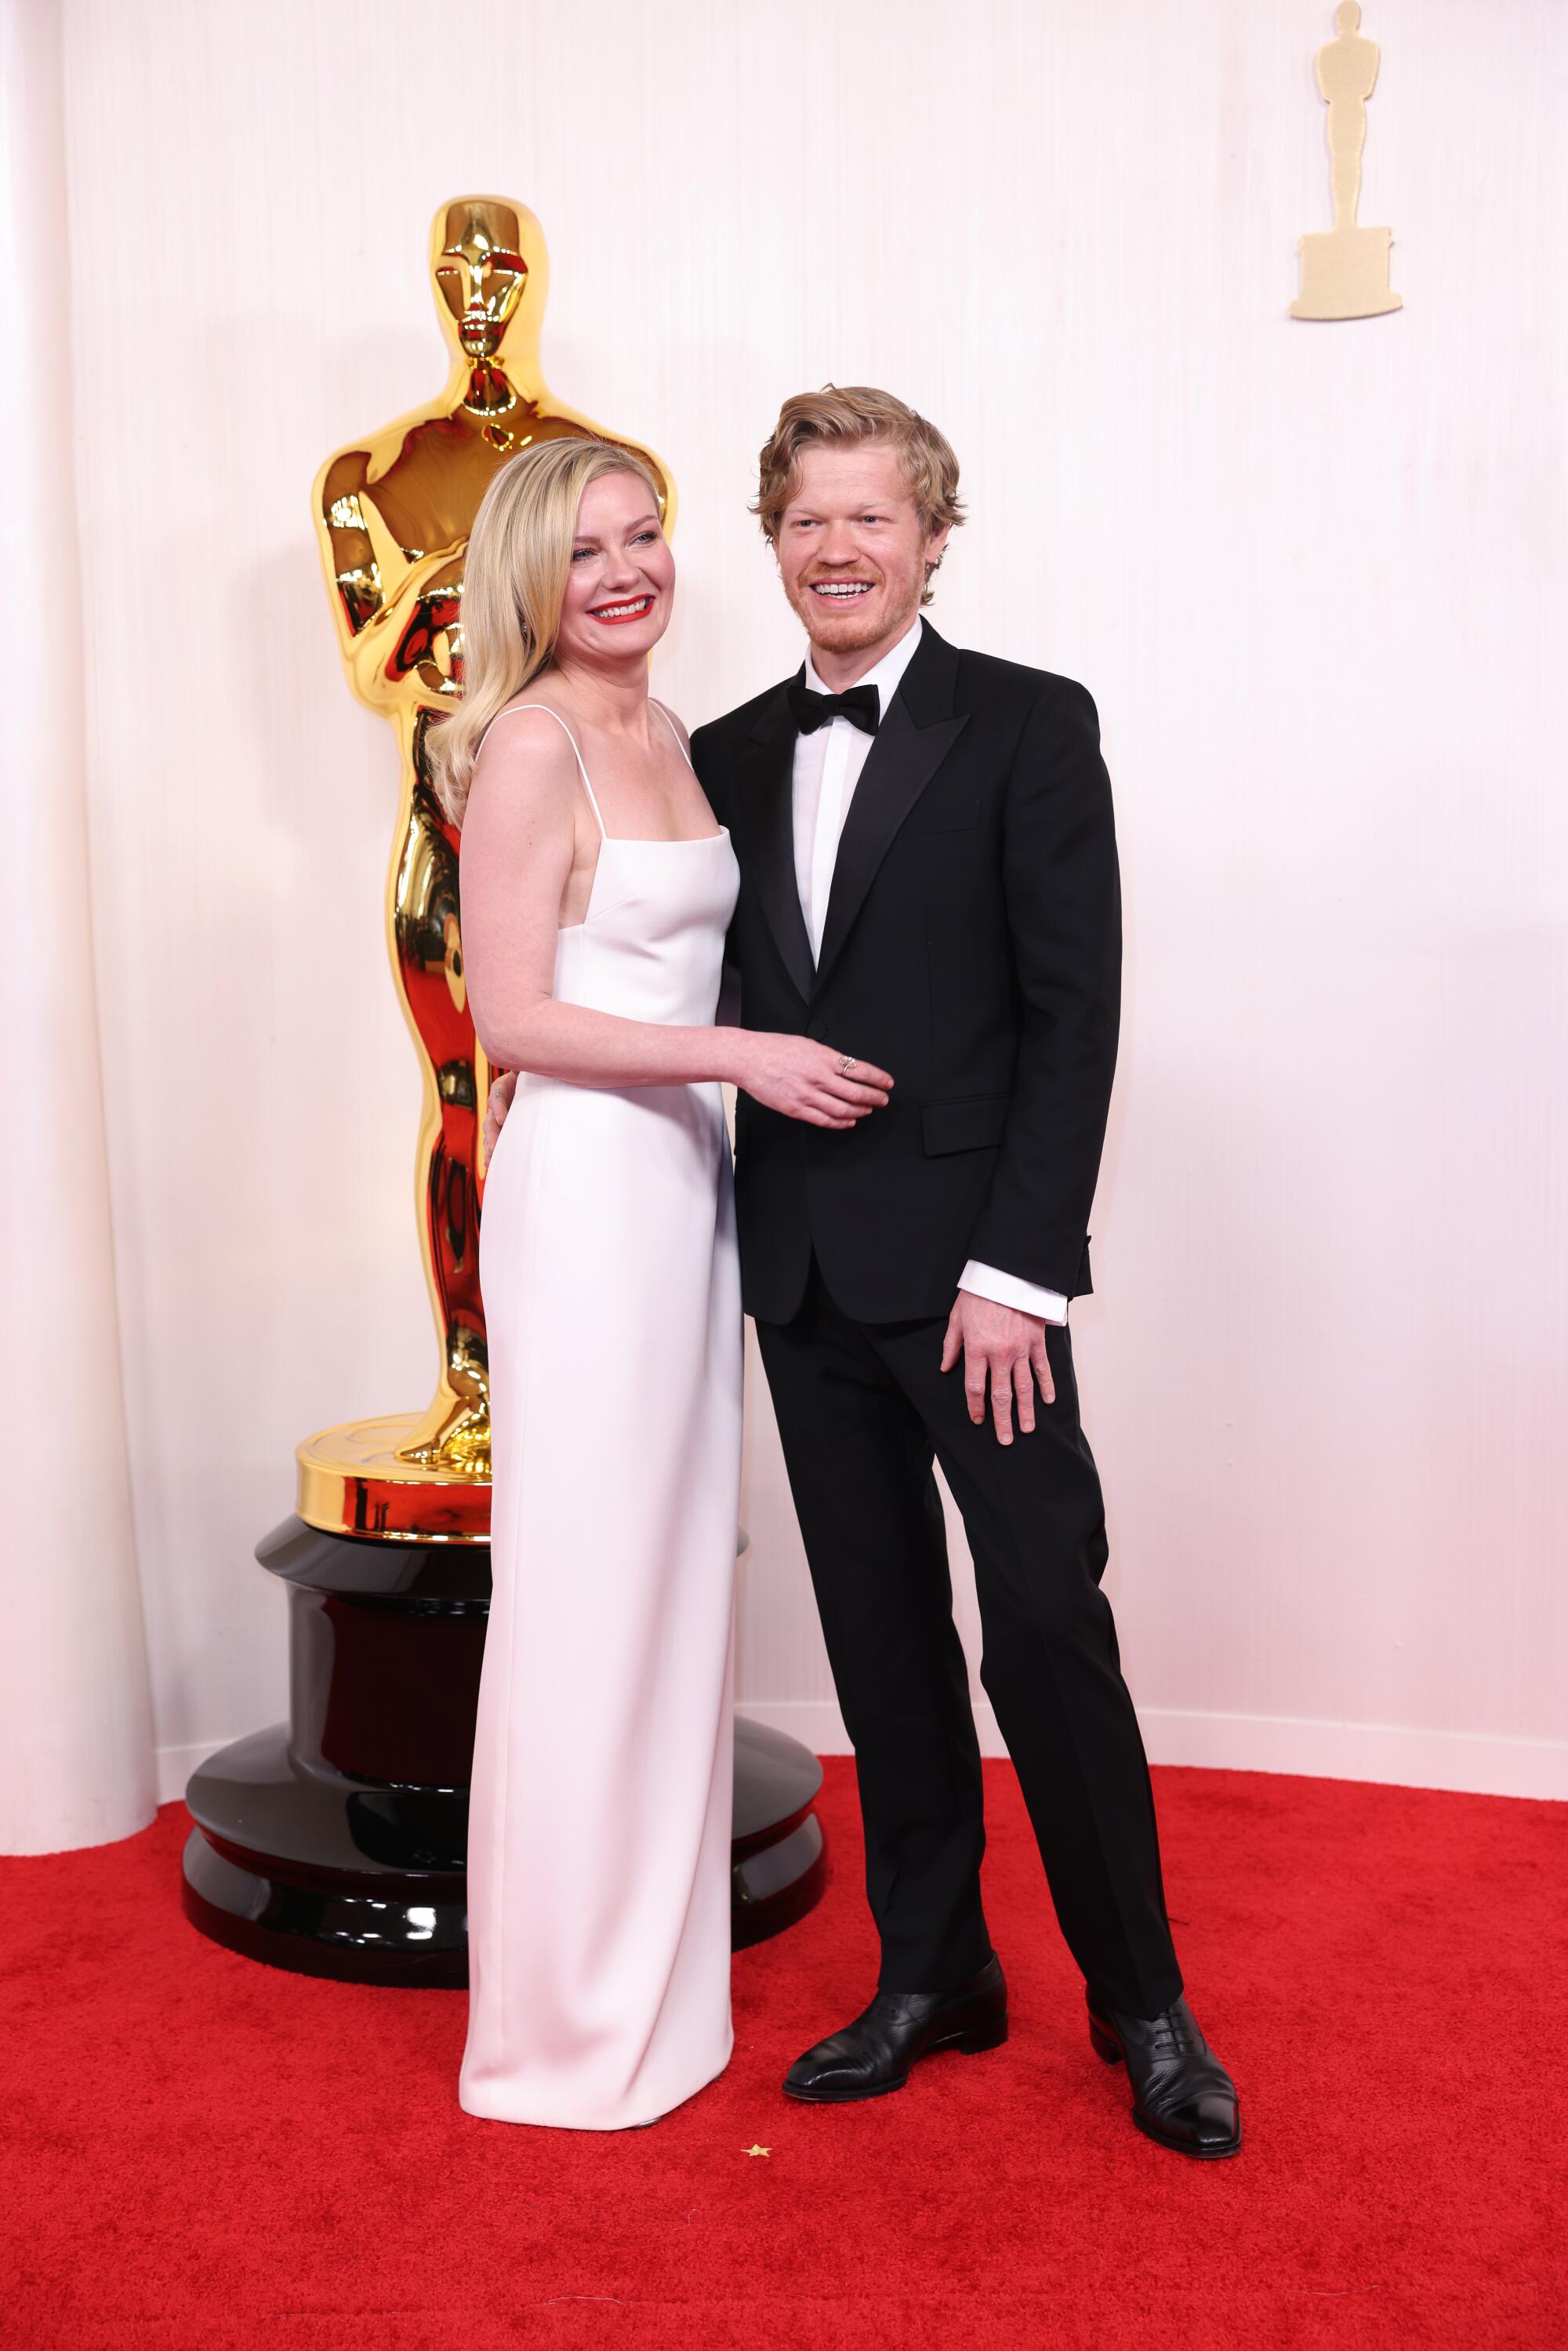 Kirsten Dunst wears a white dress with spaghetti straps, and Jesse Plemons wears a black suit. 